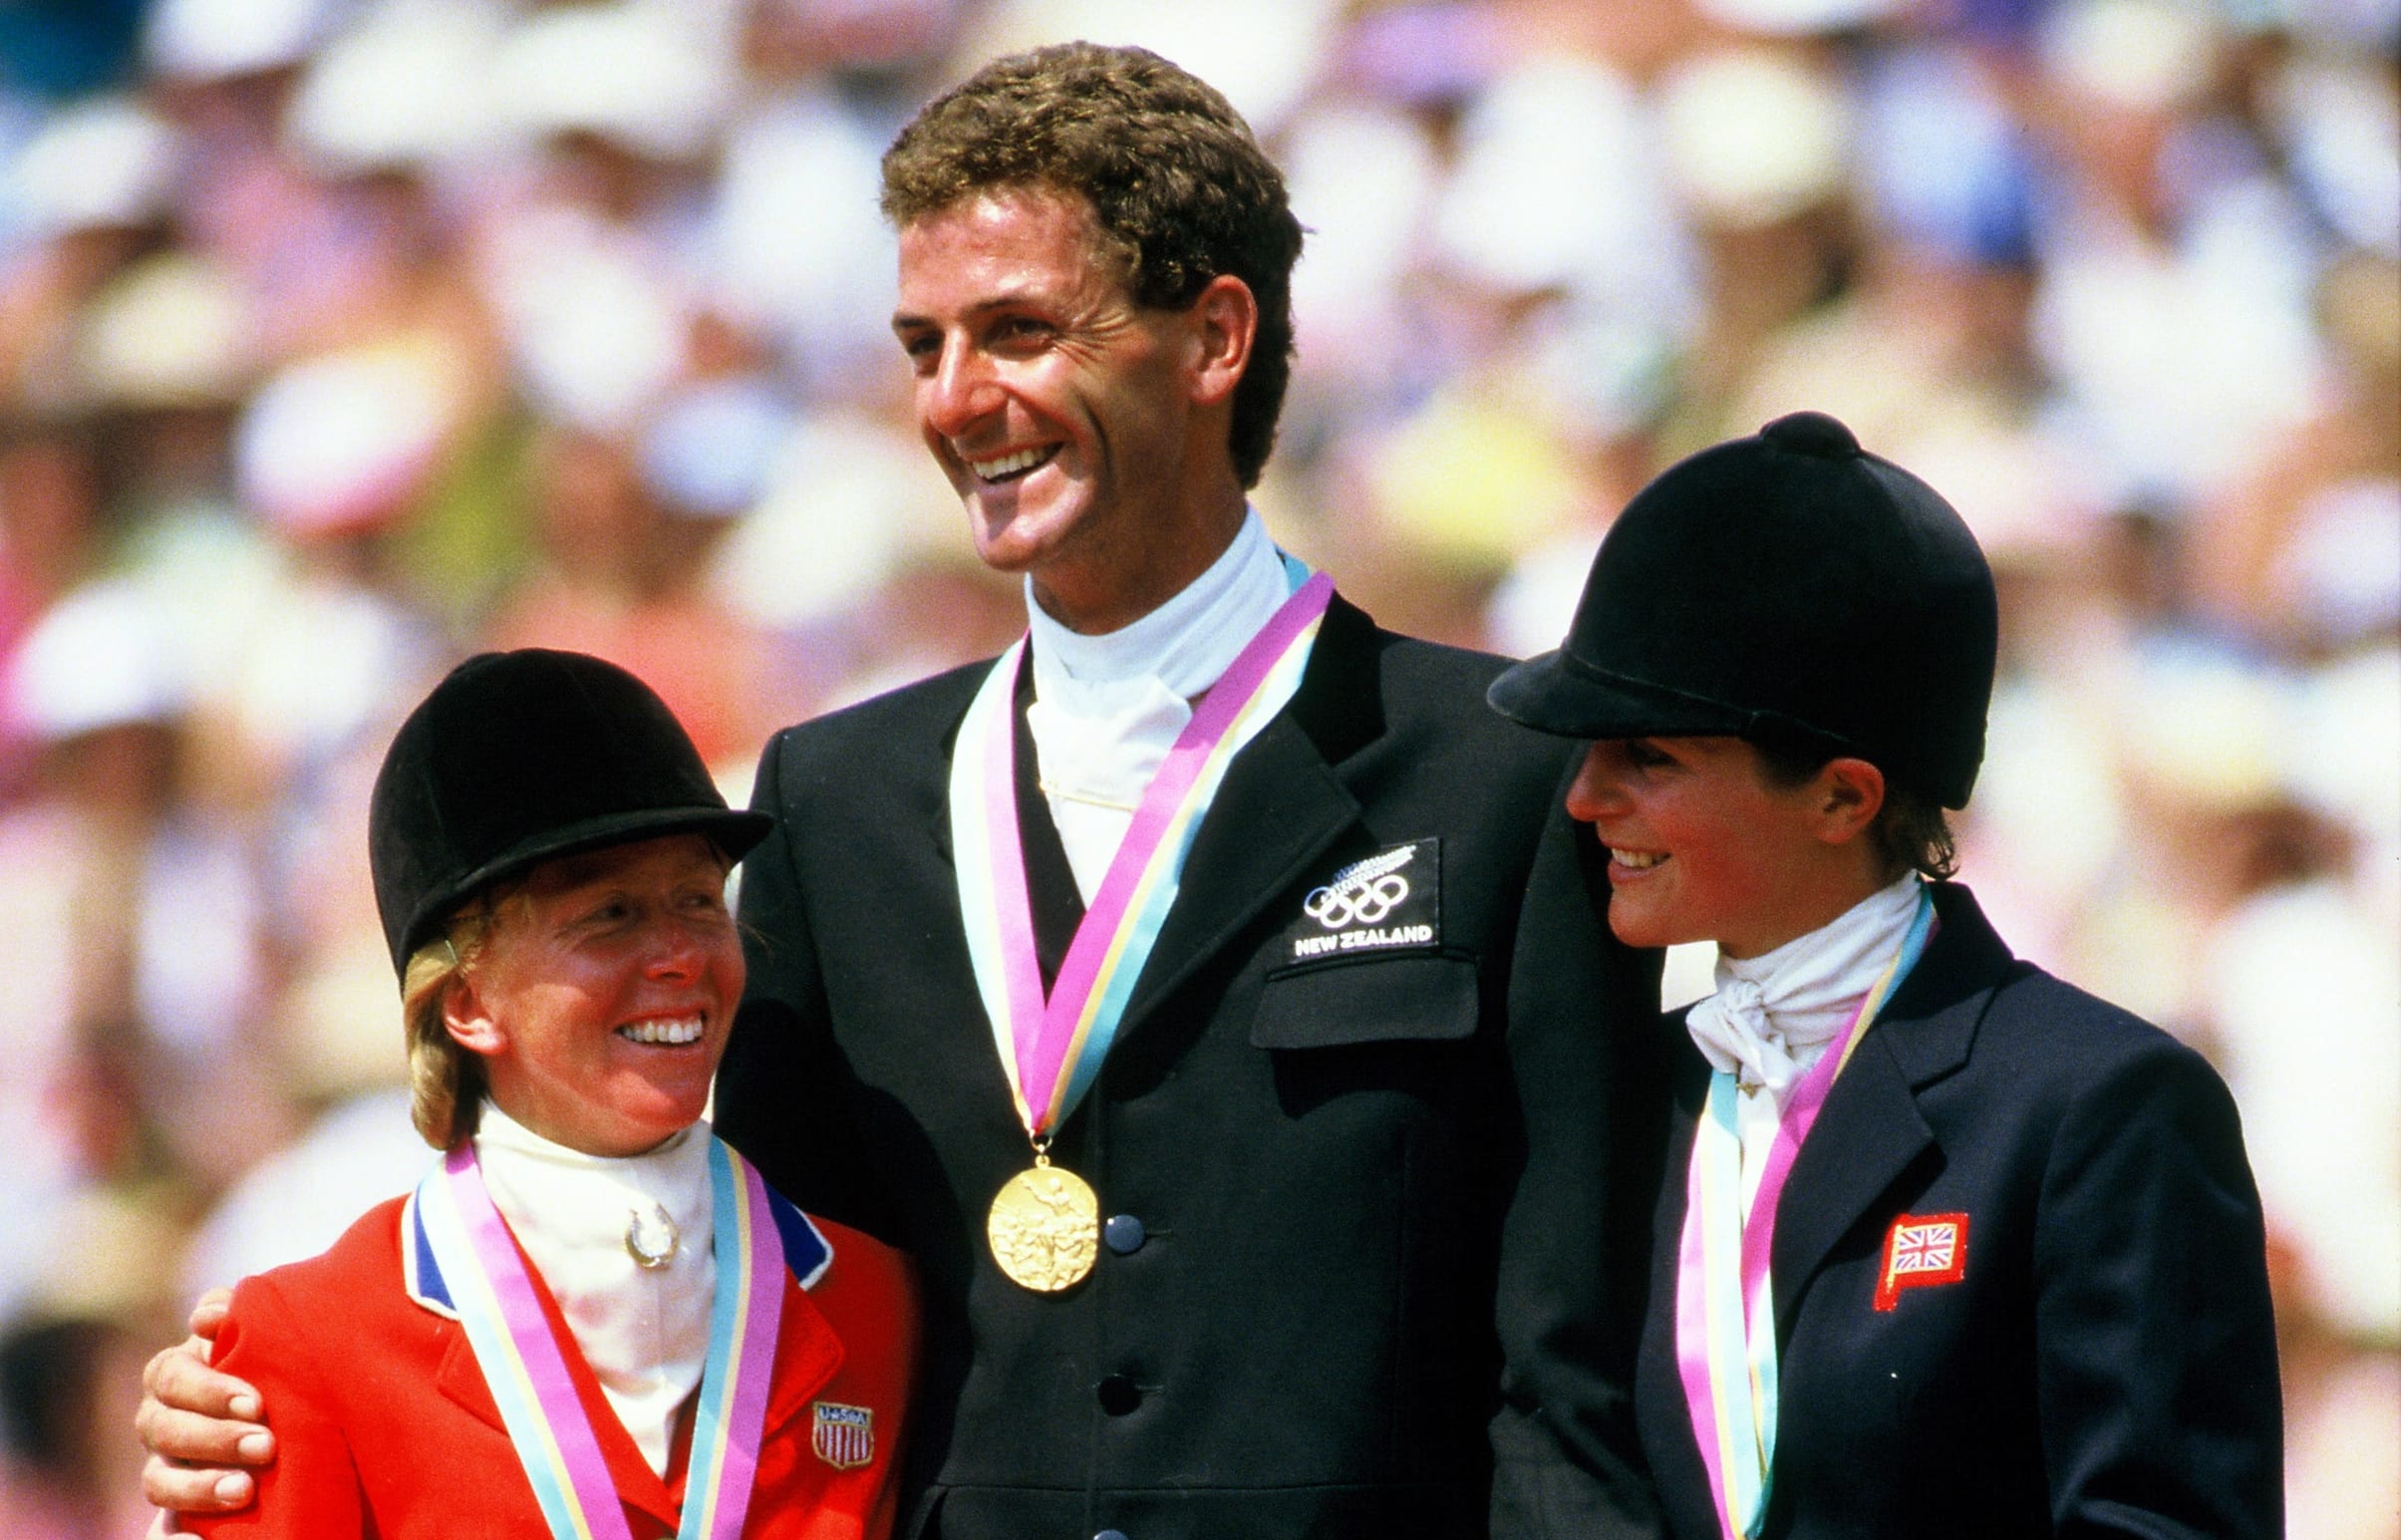 Mark Todd with Karen Stives (Silver) and Virginia Holgate-Leng (Bronze) Equestrian Individual - Los Angeles Olympic Games 1984.